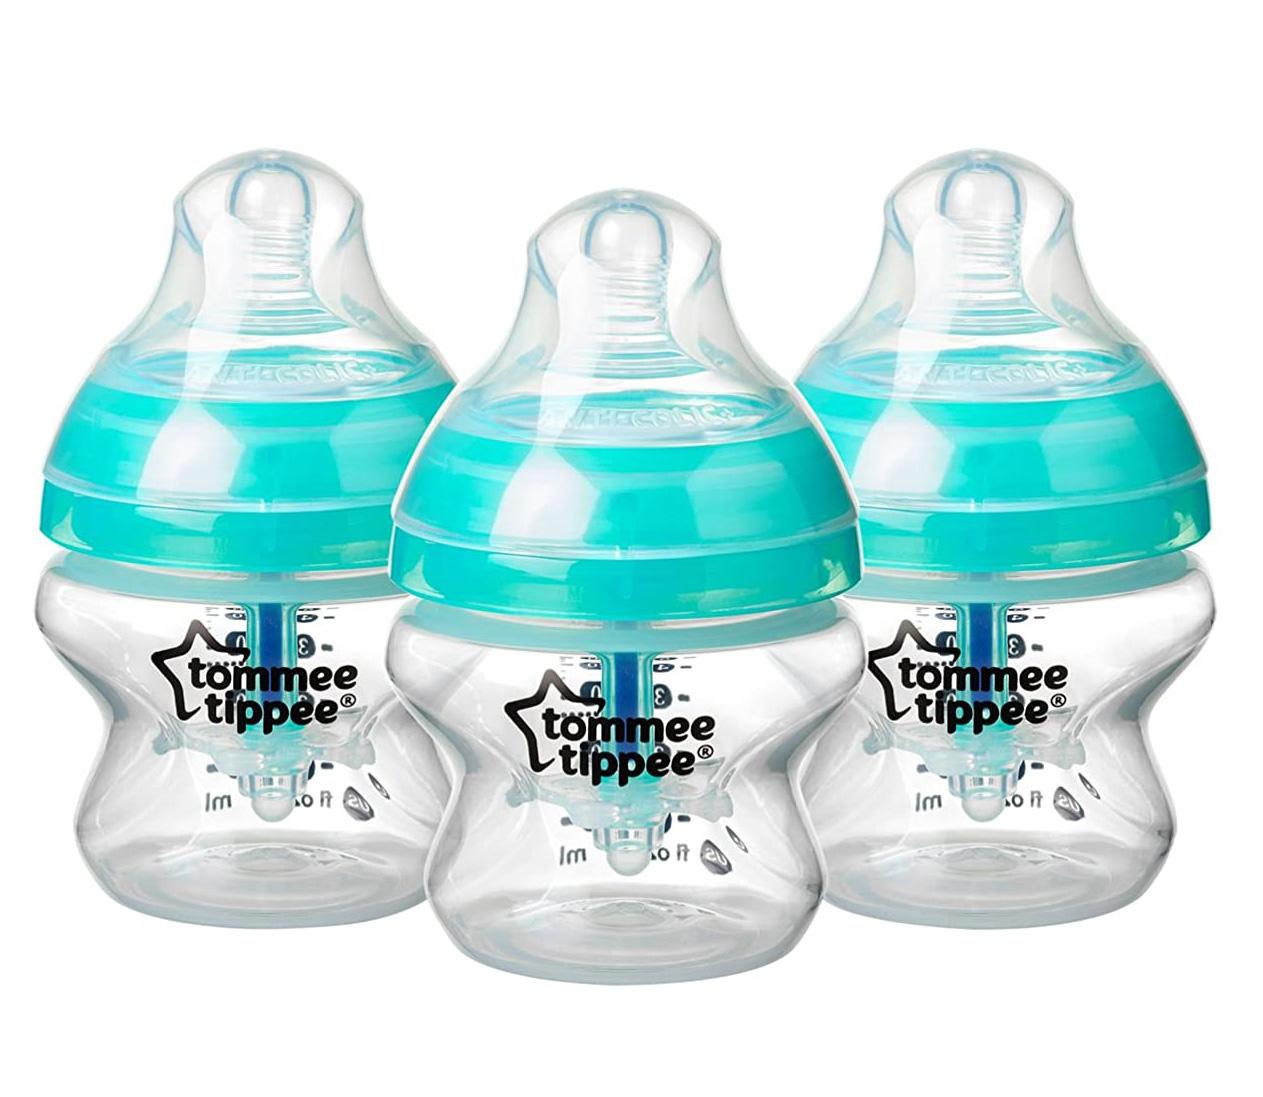 3 Tommee Tippee Anti-Colic Baby Bottles with Heat-Sensing for $11.04